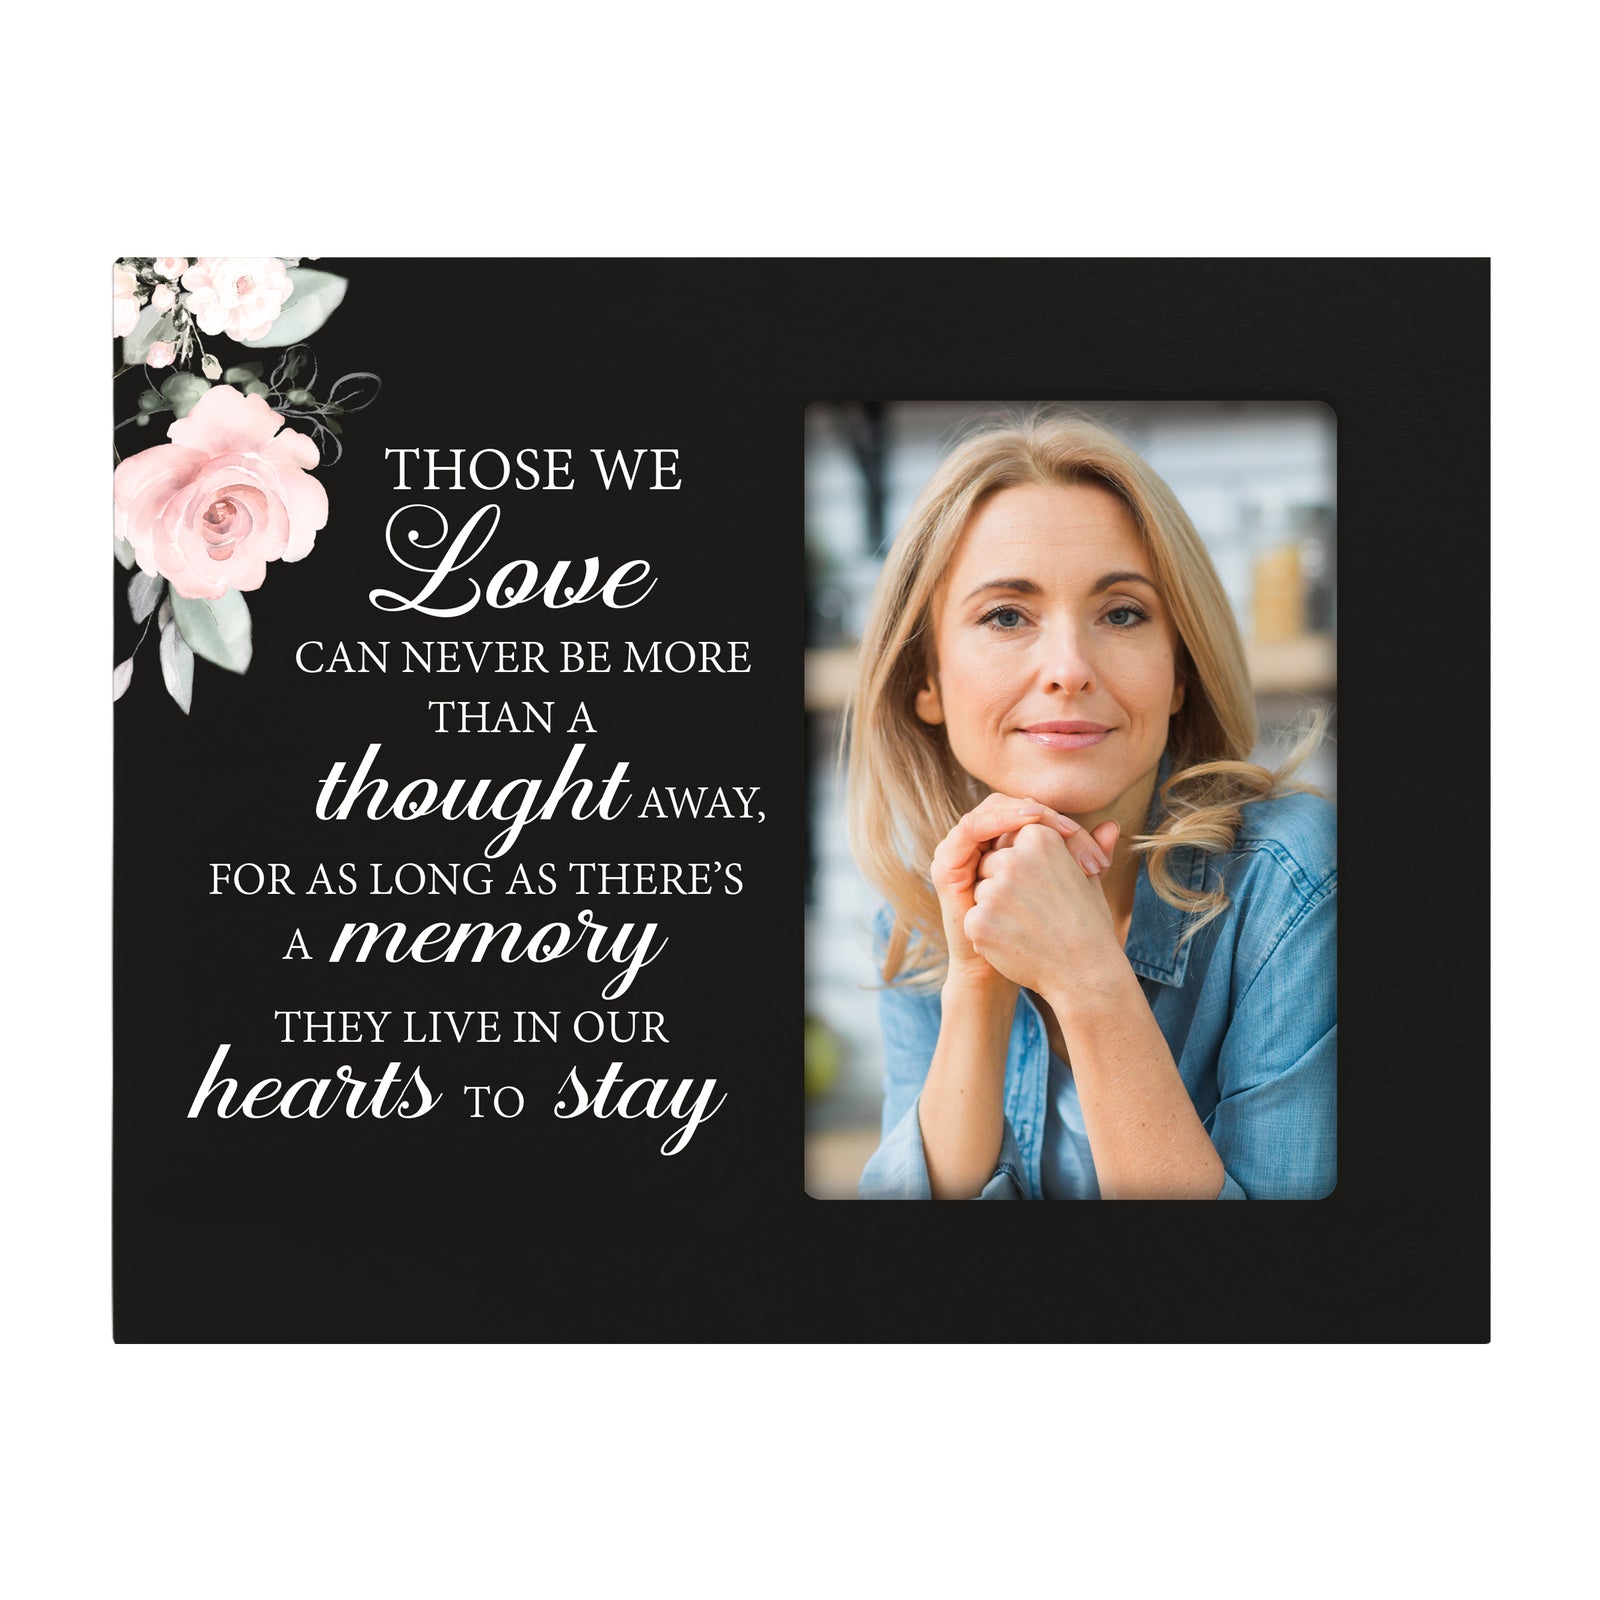 Rustic-Inspired Wooden Human Memorial Frames That Holds A 4x6in Photo - Those We Love (Flower)